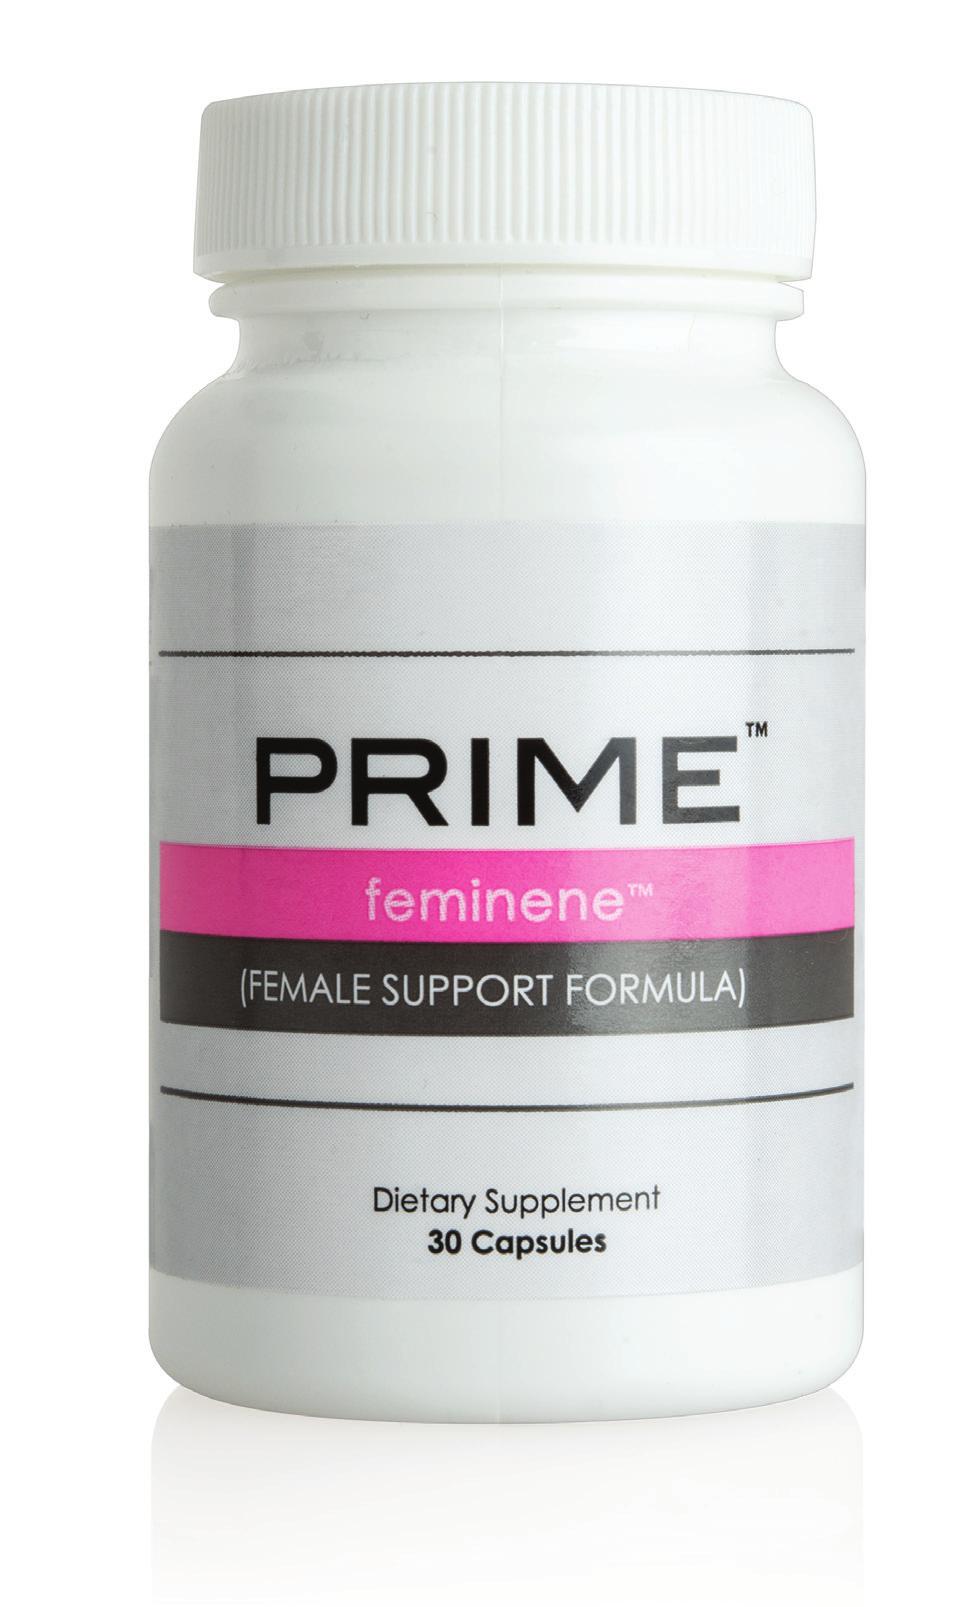 nutrametrix Prime Feminene Female Support Formula Helps to reduce hot flashes and night sweats associated with menopause Helps stabilize mood May help maintain normal hormone balance Helps alleviate